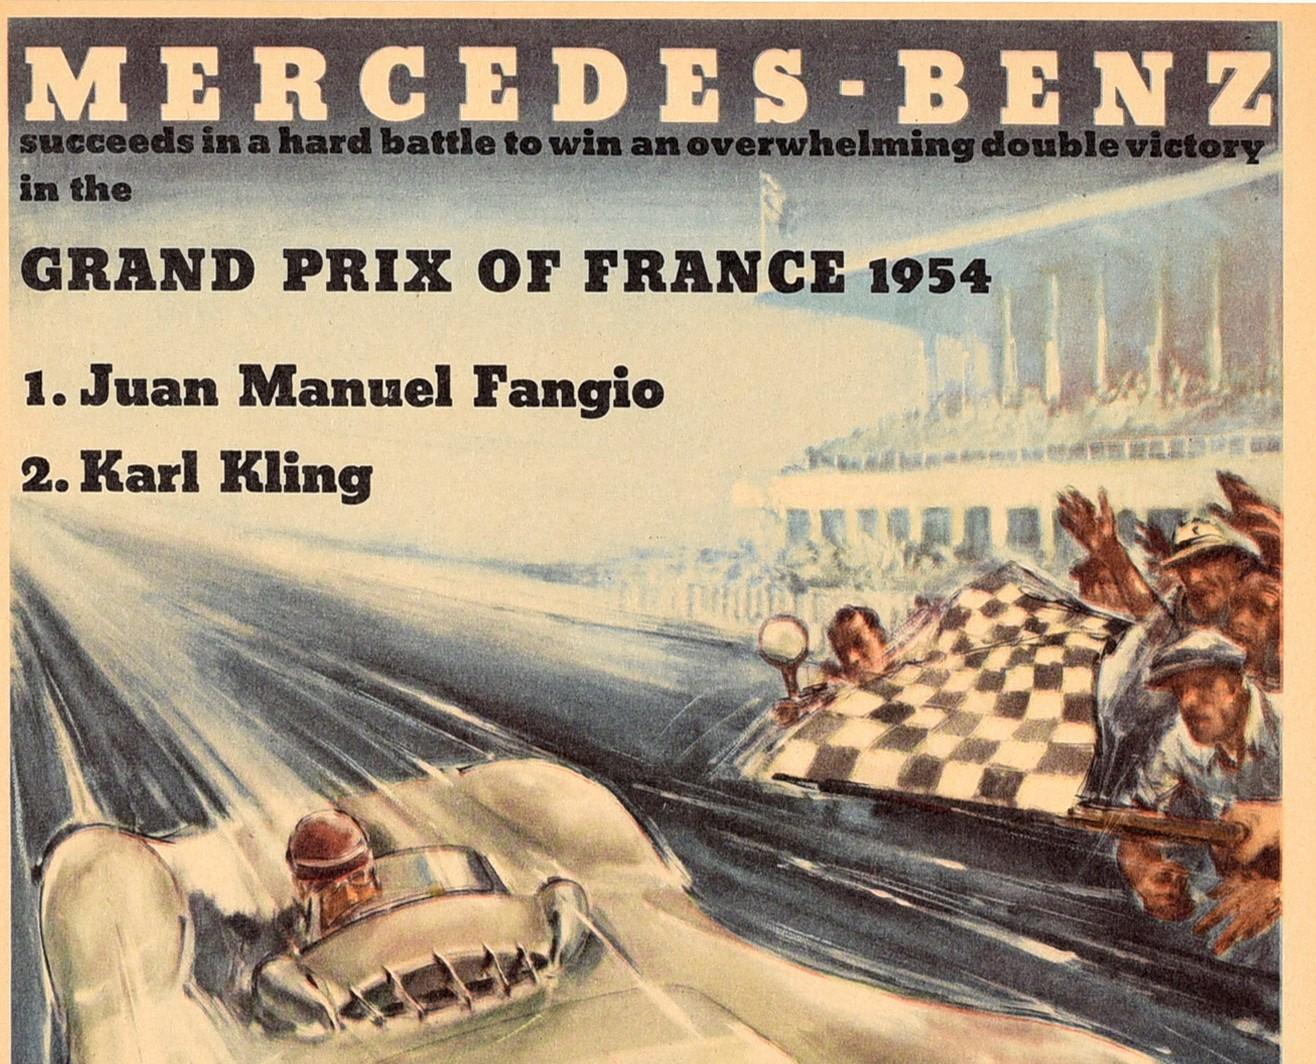 Original vintage motor sport poster - Mercedes-Benz succeeds in a hard battle to win an overwhelming victory in the Grand Prix of France 1954 1. Juan Manuel Fangio 2. Karl Kling - featuring great artwork by the notable Austrian graphic designer,